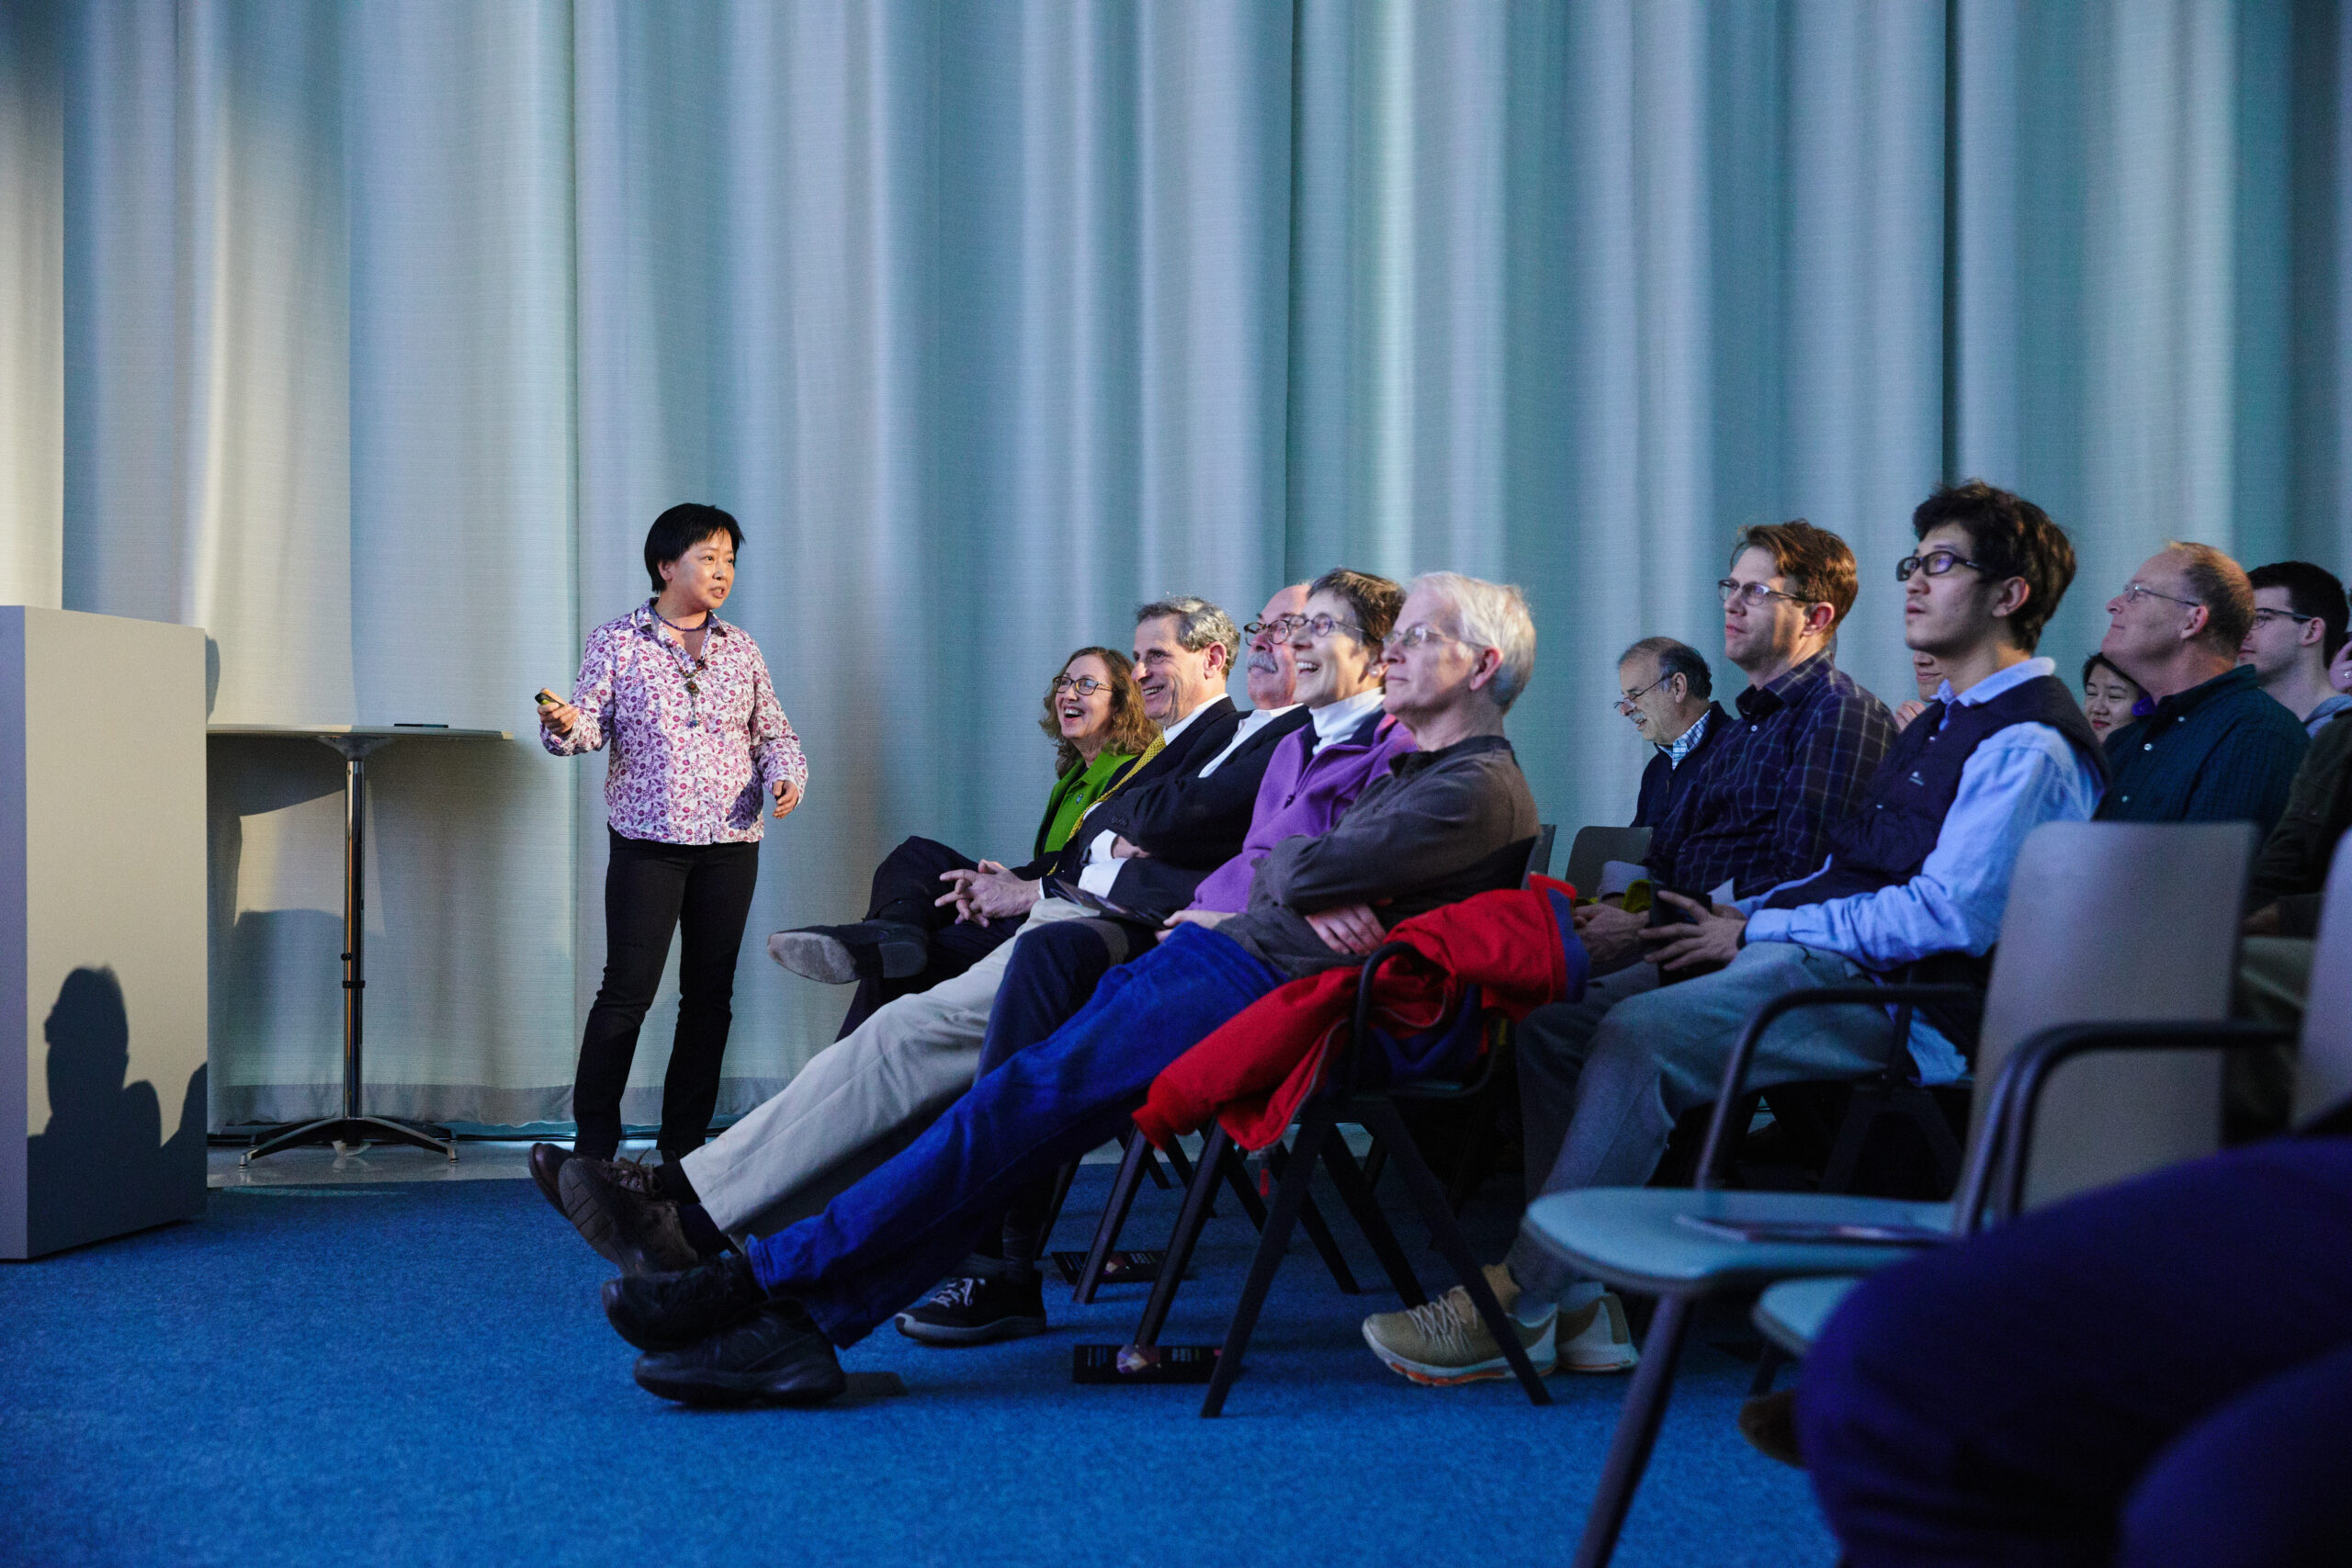 Professor Xin Zhang delivers the 2018 DeLisi Distinguished Lecture. Photo by Dave Green